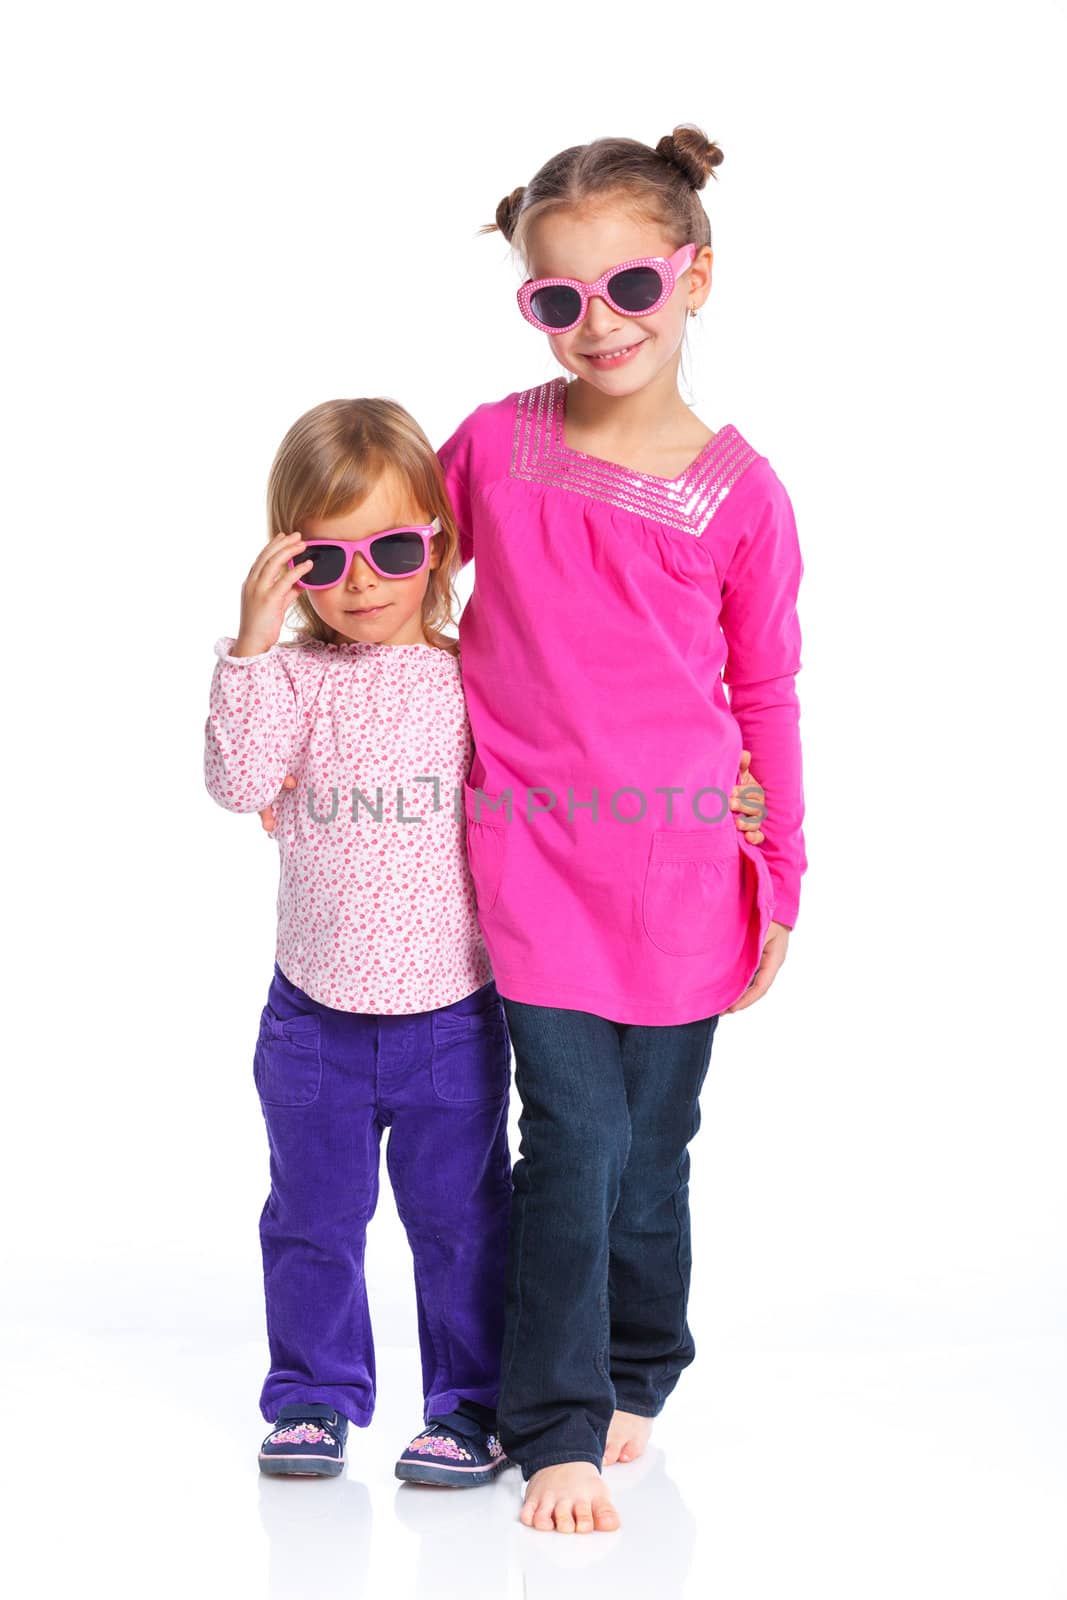 Two happy adorable smiling sisters in sunglasses. Isolated white background